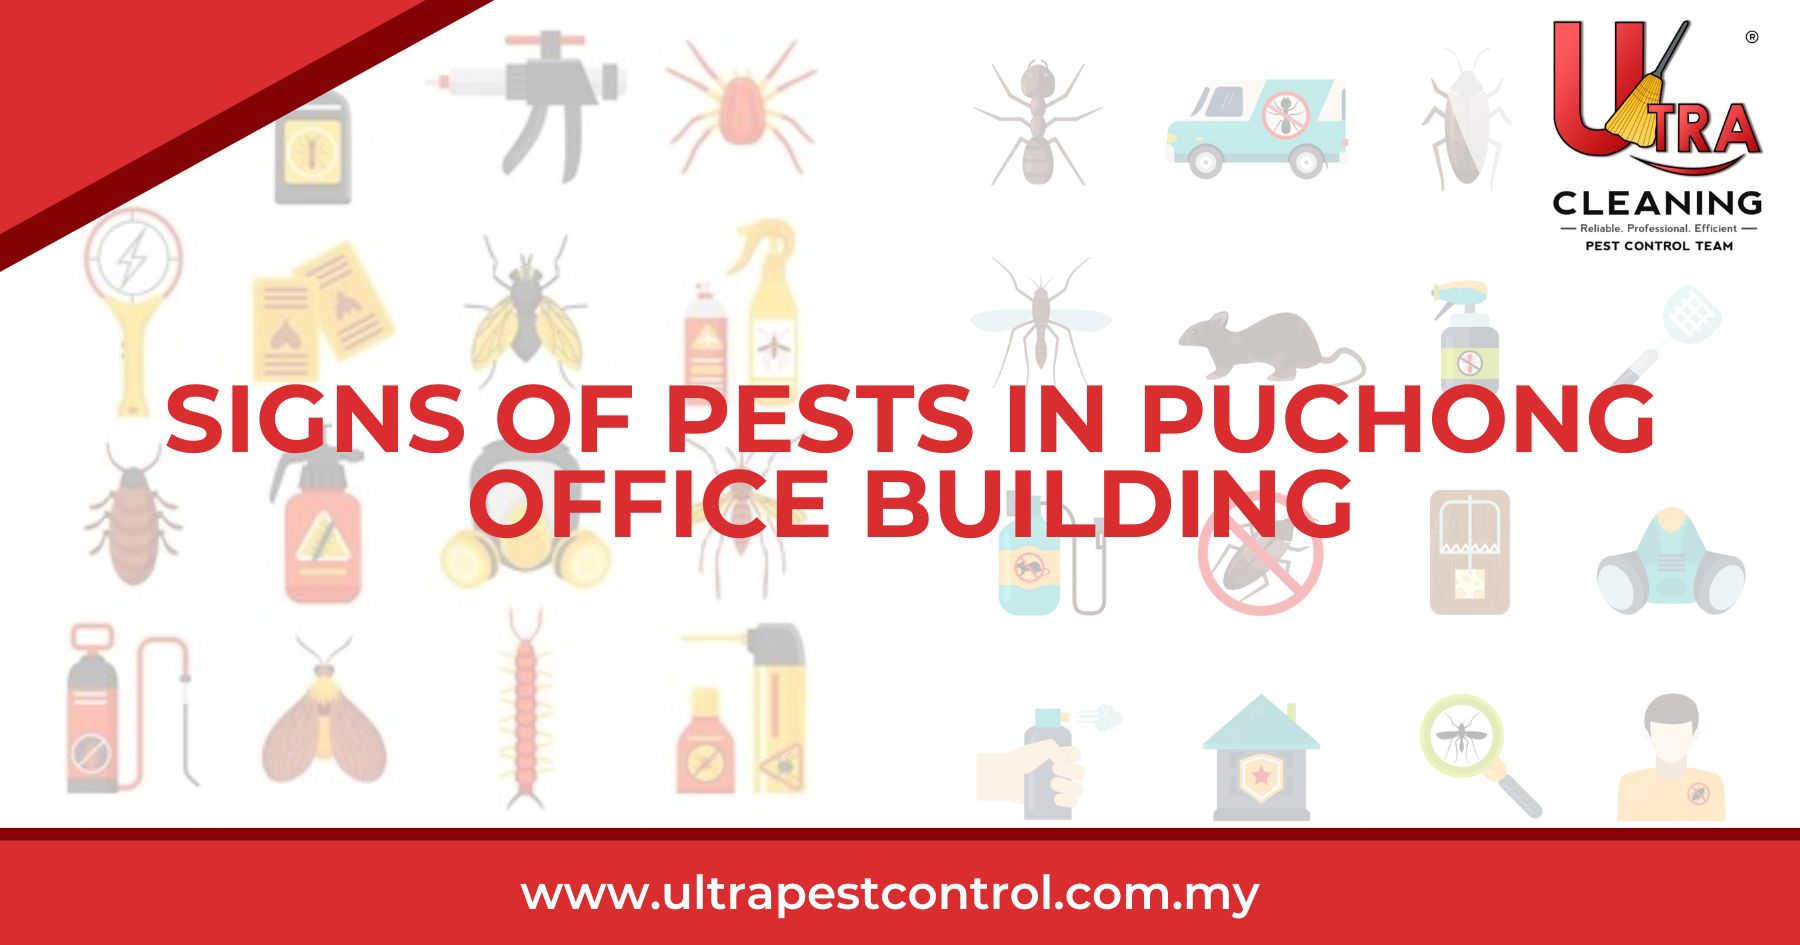 Signs of Pests in Puchong Office Building